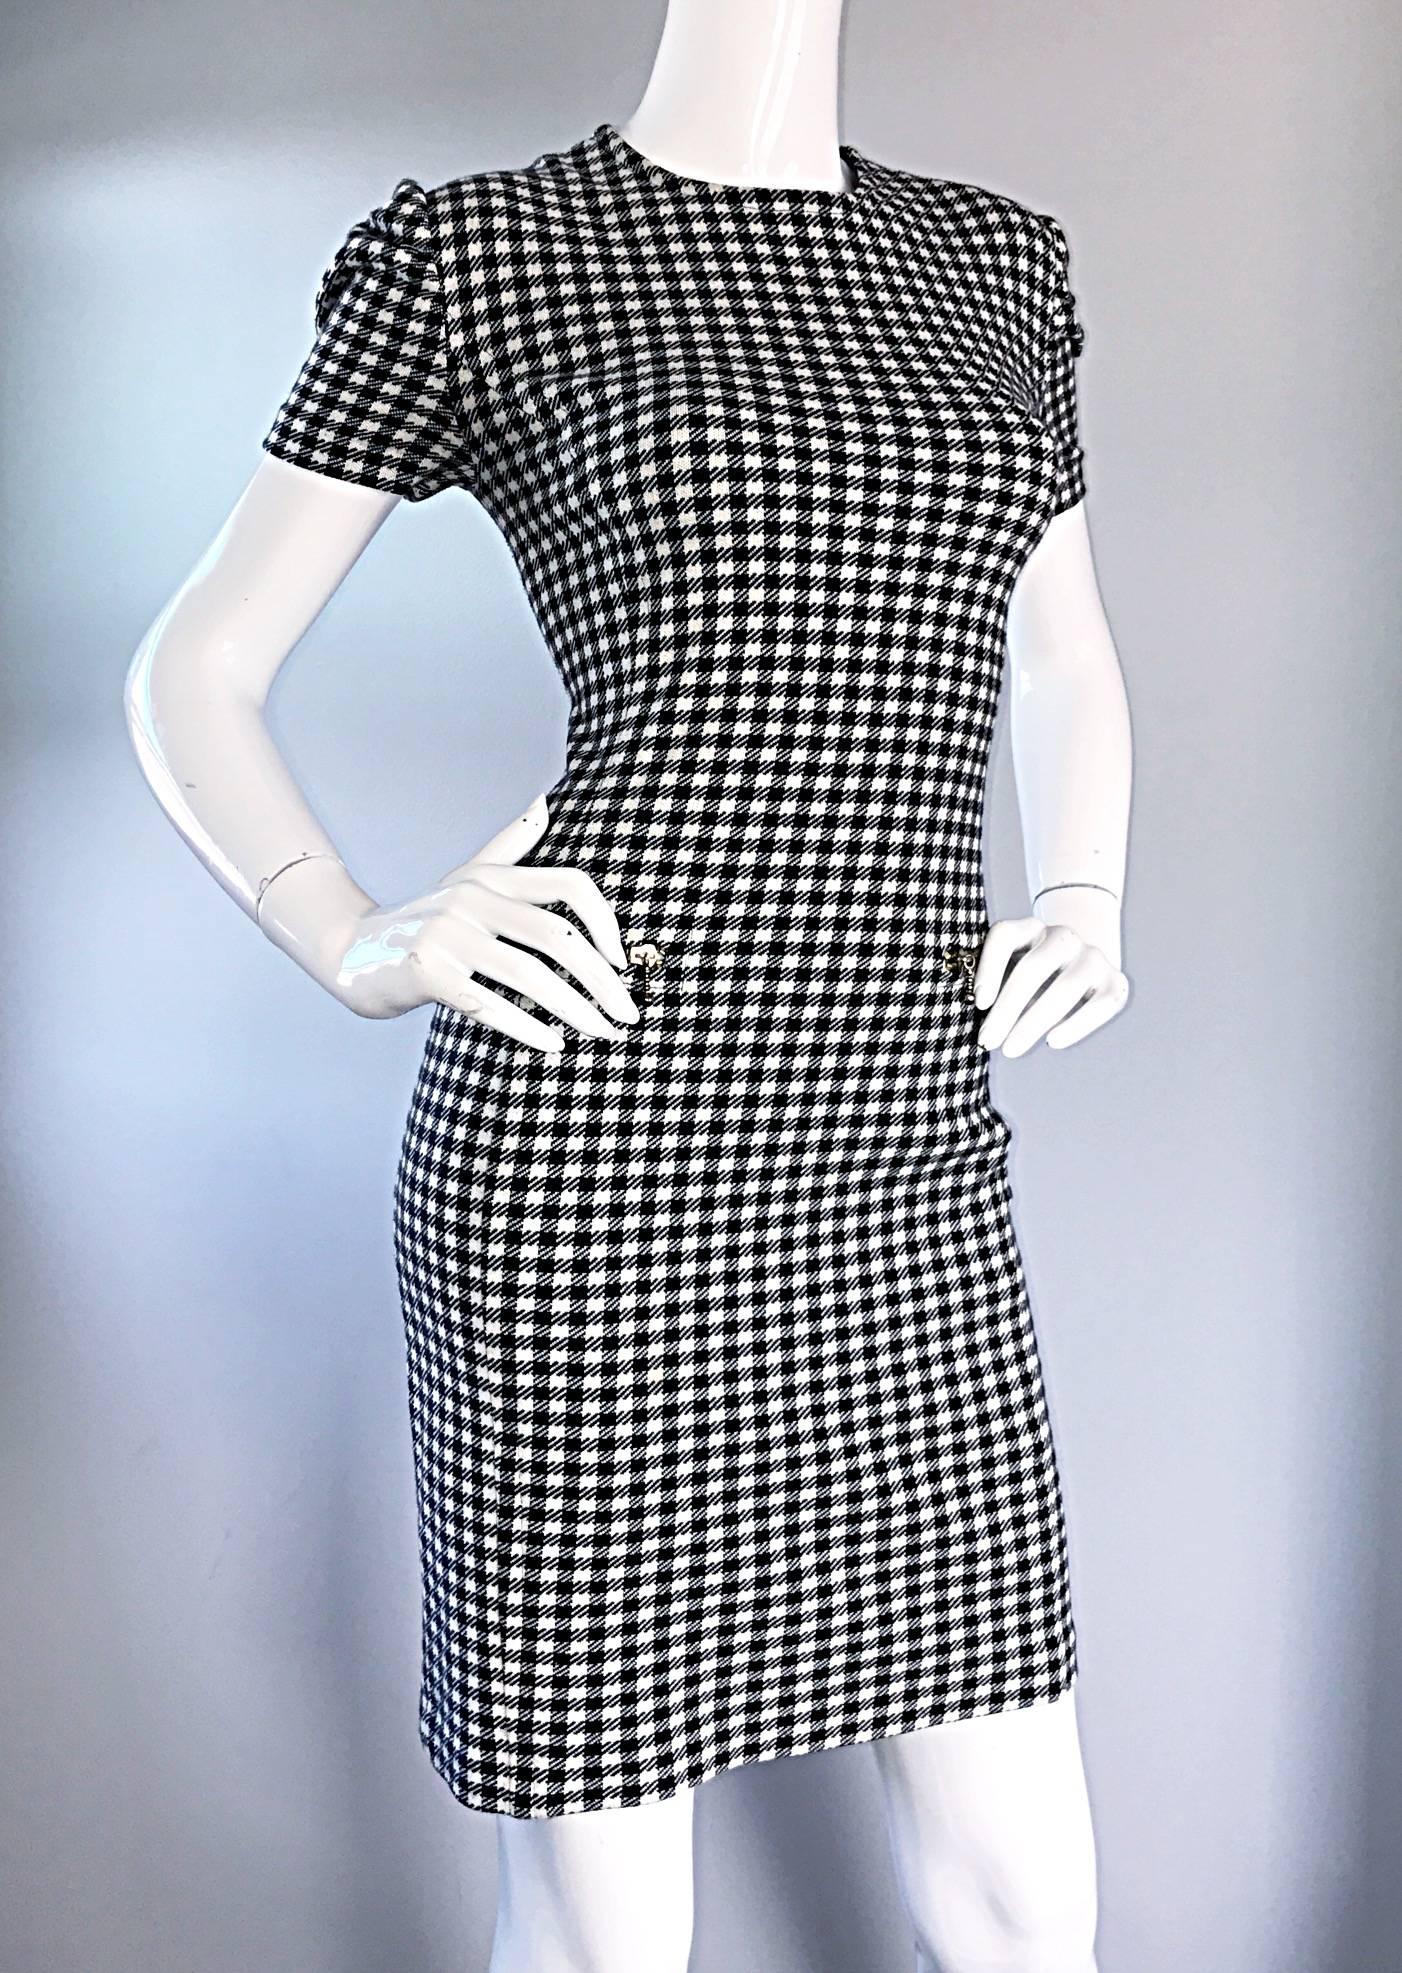 1990s Black and White Gingham Bodycon 90s Checkered Sexy Vintage Cotton Dress  For Sale 3